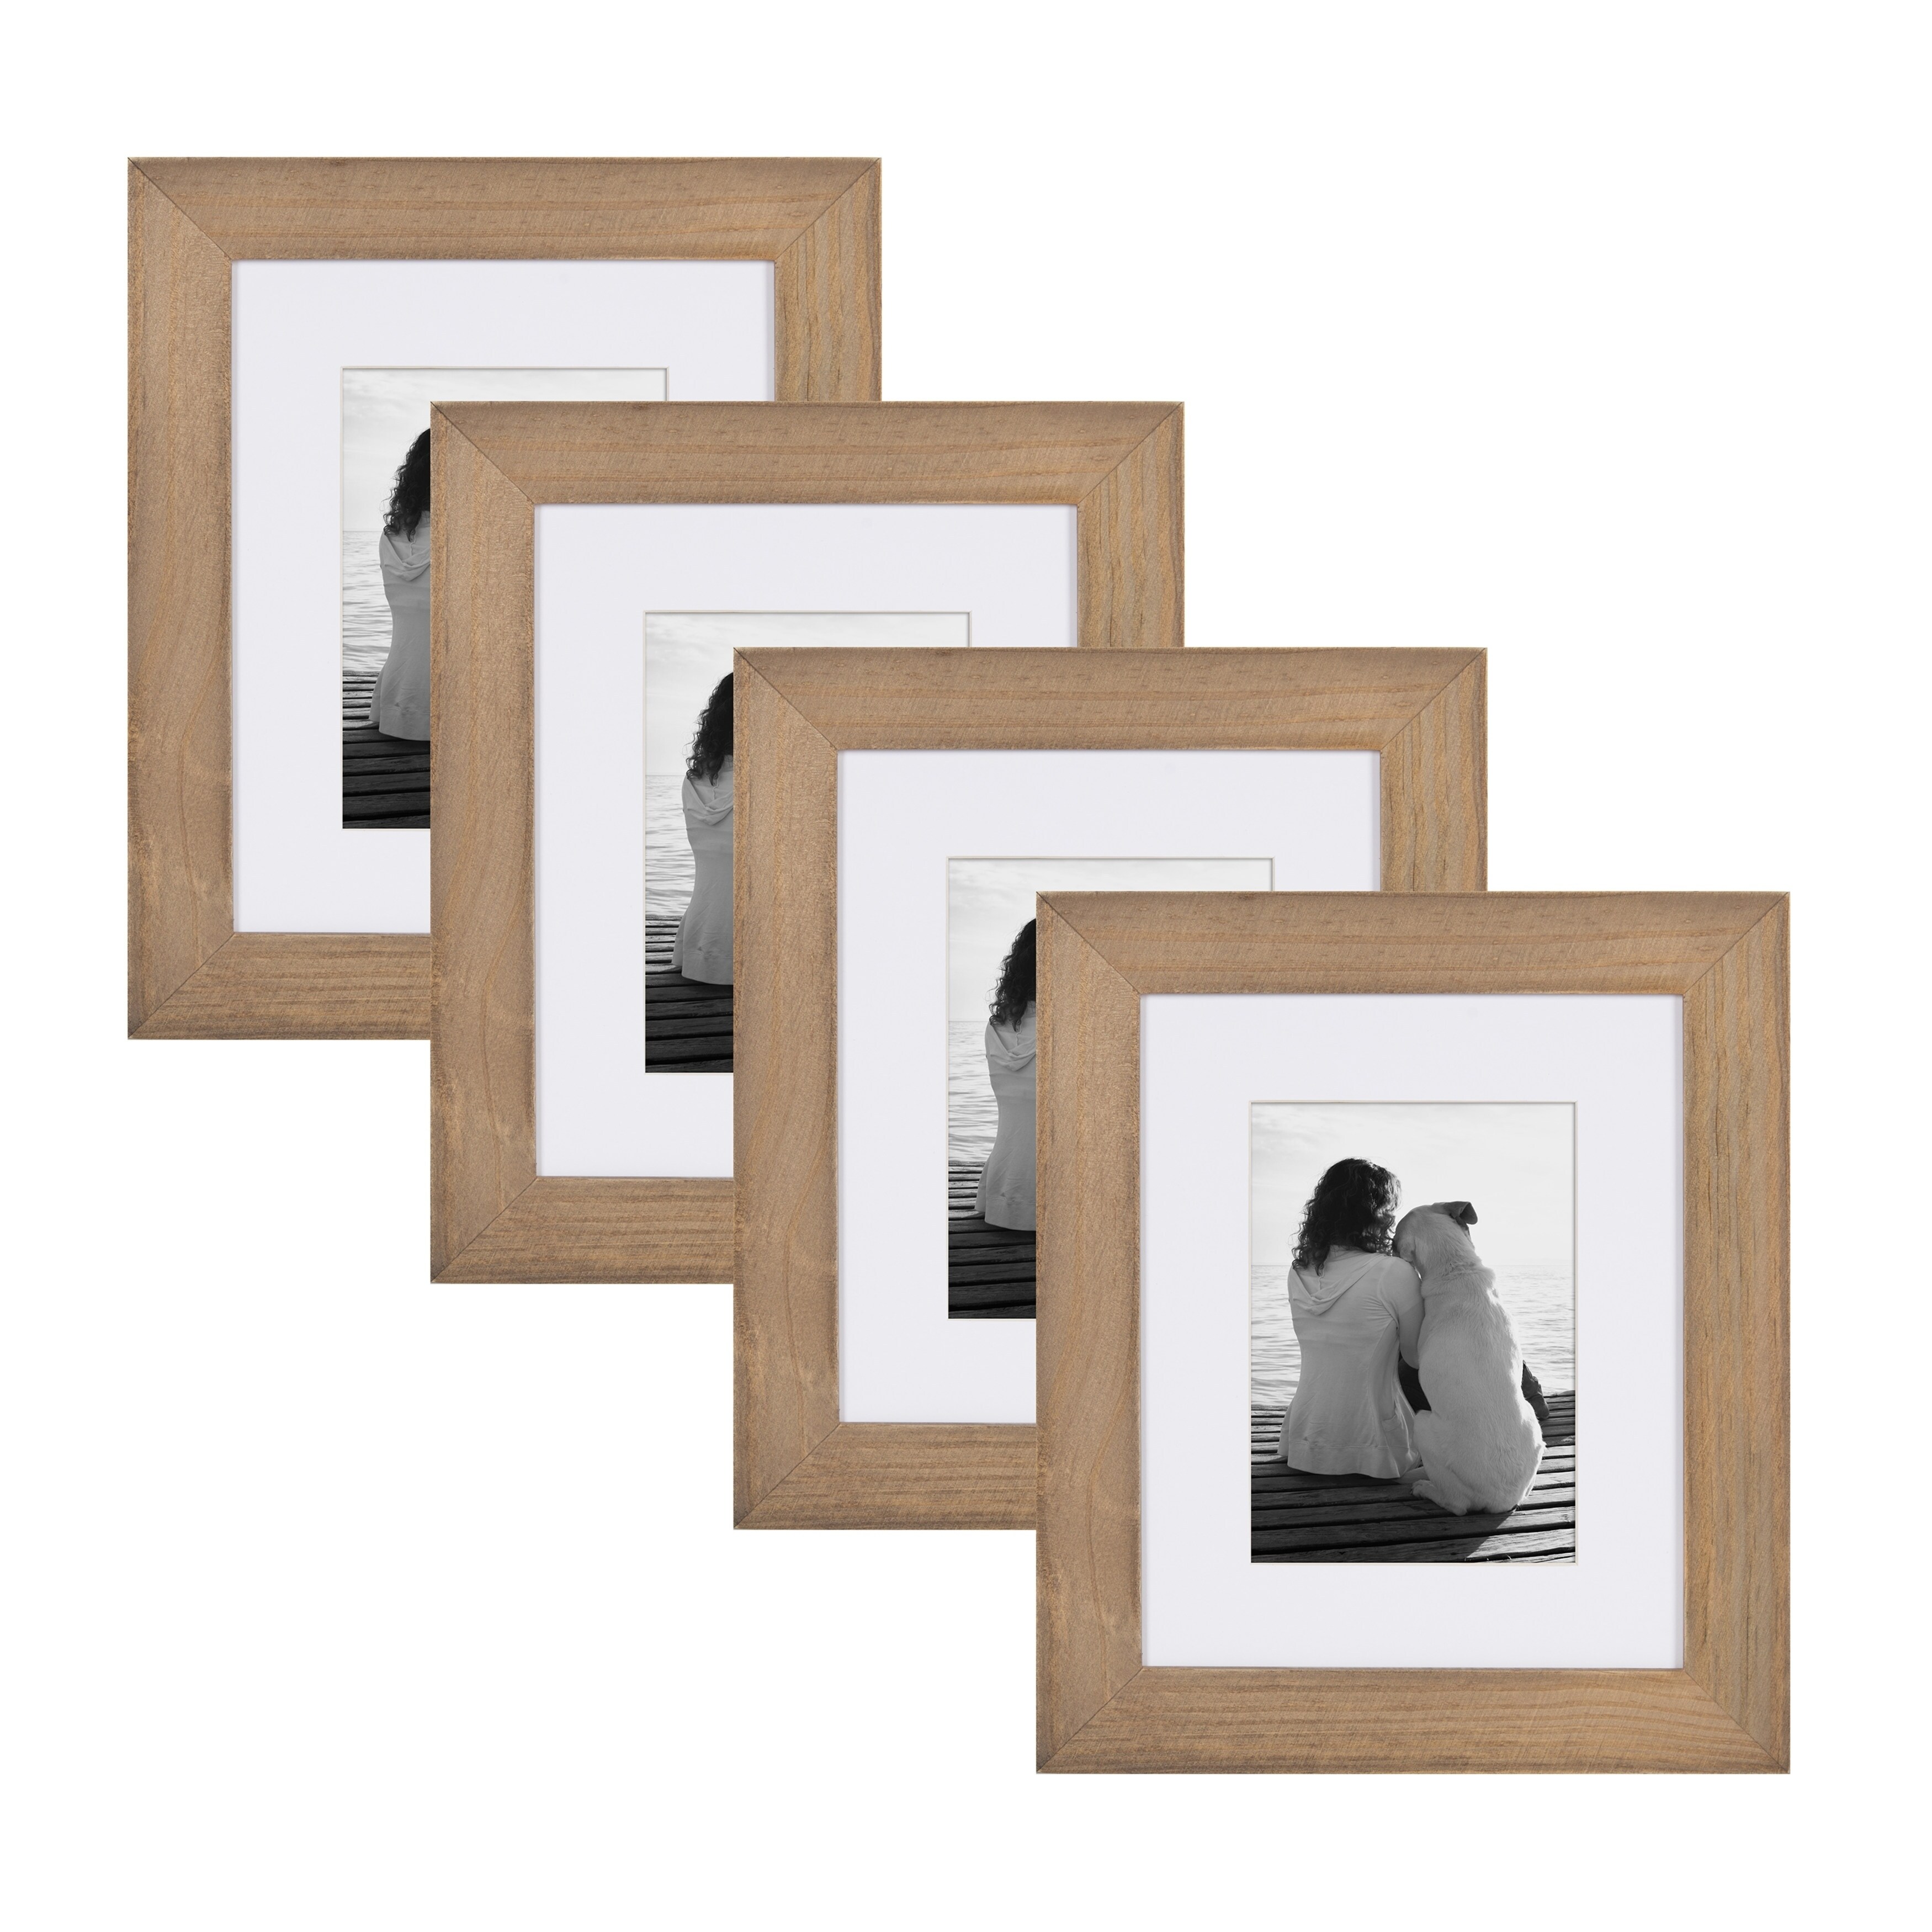 https://ak1.ostkcdn.com/images/products/22650978/DesignOvation-Museum-Wood-Picture-Frame-Set-0169a174-1c71-411d-9f93-3afd58a7cd80.jpg